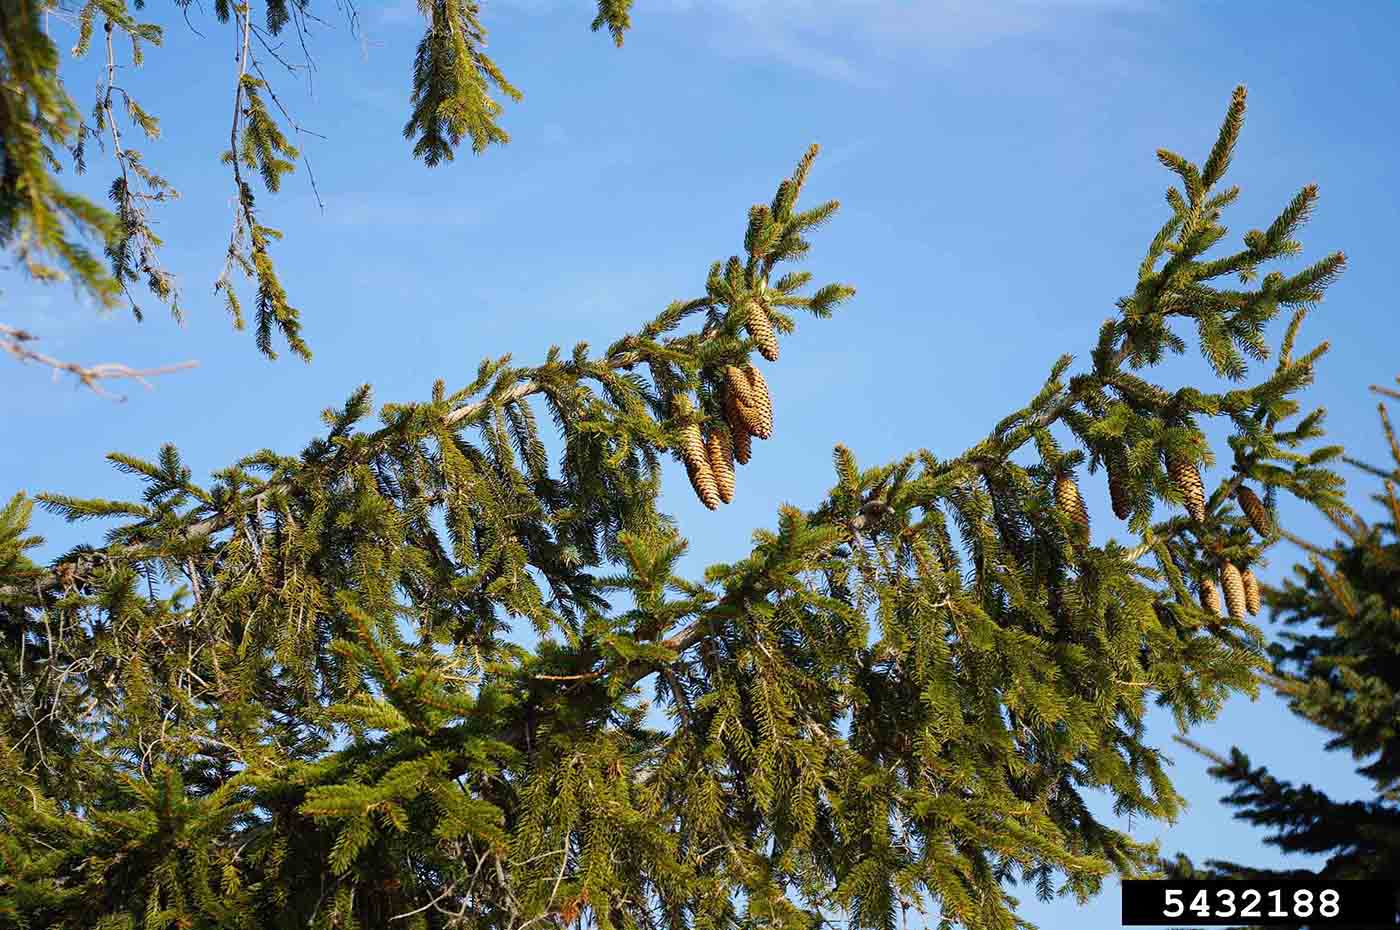 Norway spruce foliage and cones